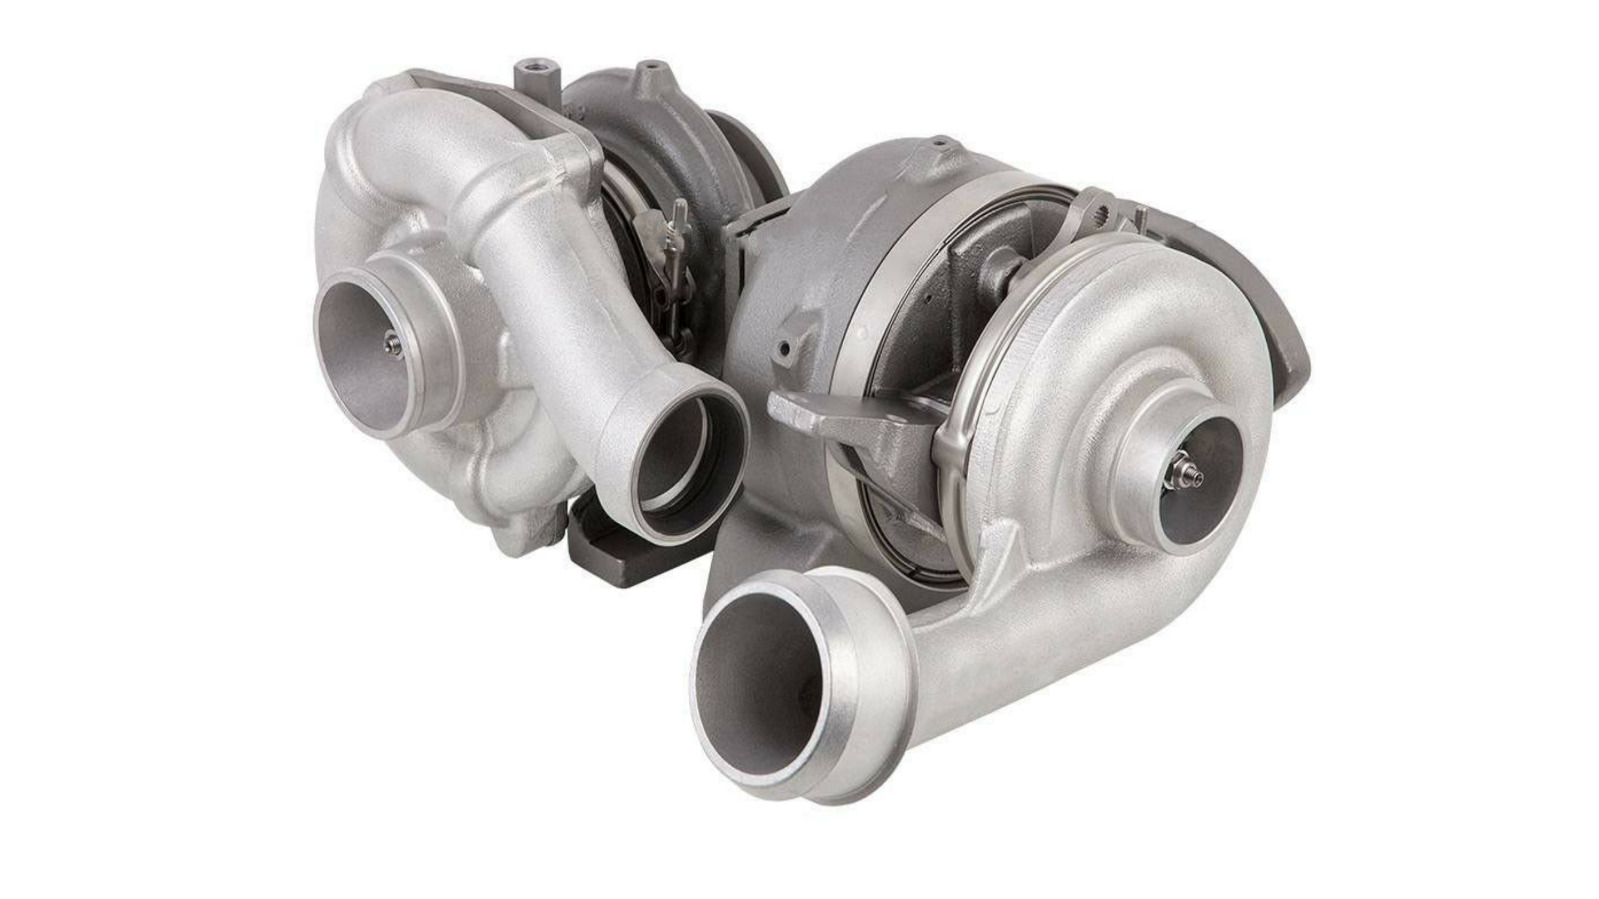 Rudy's Remanufactured Replacement Turbos For 08-10 Ford 6.4L Powerstroke Diesel